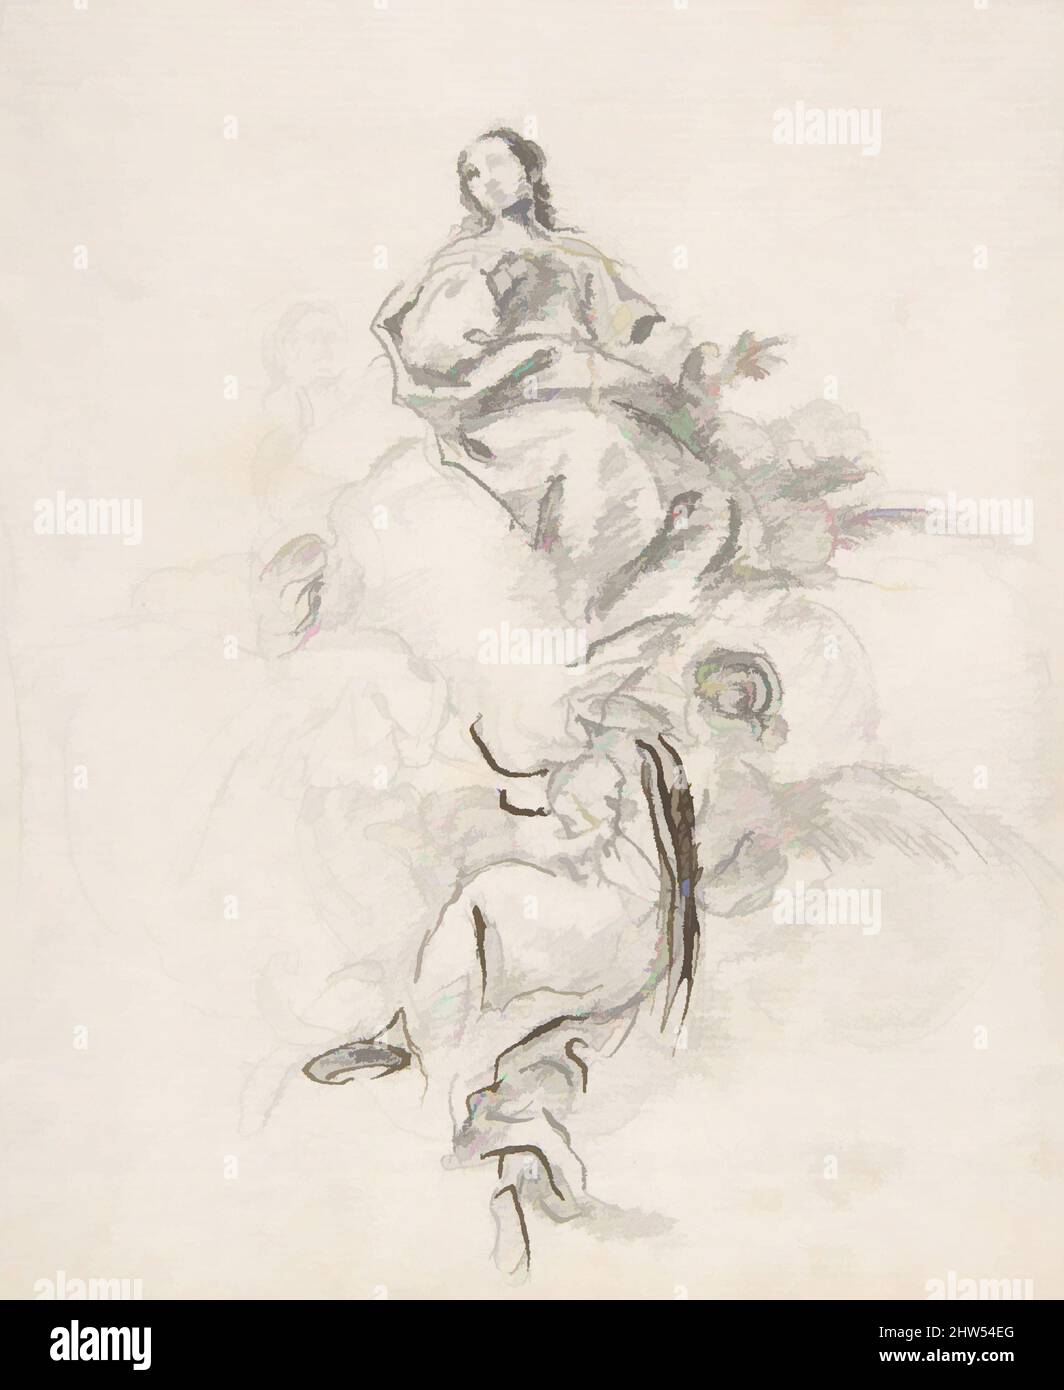 Art inspired by Virgin of the Immaculate Conception Seated on Clouds, Supported by Four Angels, 17th century, Black chalk. Lower angel reinforced with pen and dark brown ink. Traces of outline in black chalk along left and right borders of the composition. On off-white paper, 6-1/2 x 5, Classic works modernized by Artotop with a splash of modernity. Shapes, color and value, eye-catching visual impact on art. Emotions through freedom of artworks in a contemporary way. A timeless message pursuing a wildly creative new direction. Artists turning to the digital medium and creating the Artotop NFT Stock Photo